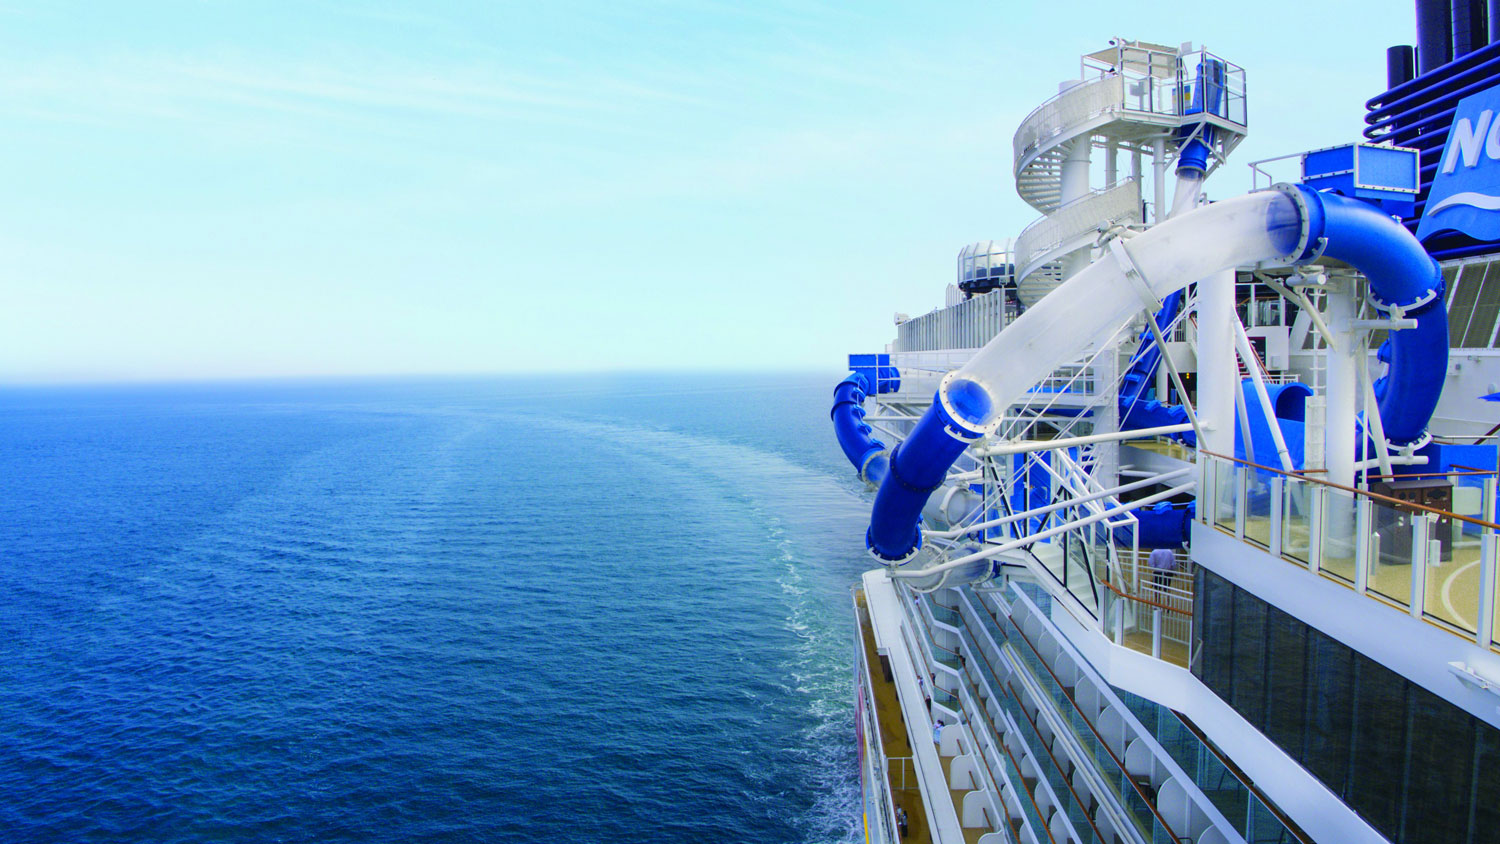 Why Norwegian Joy is a gift from China